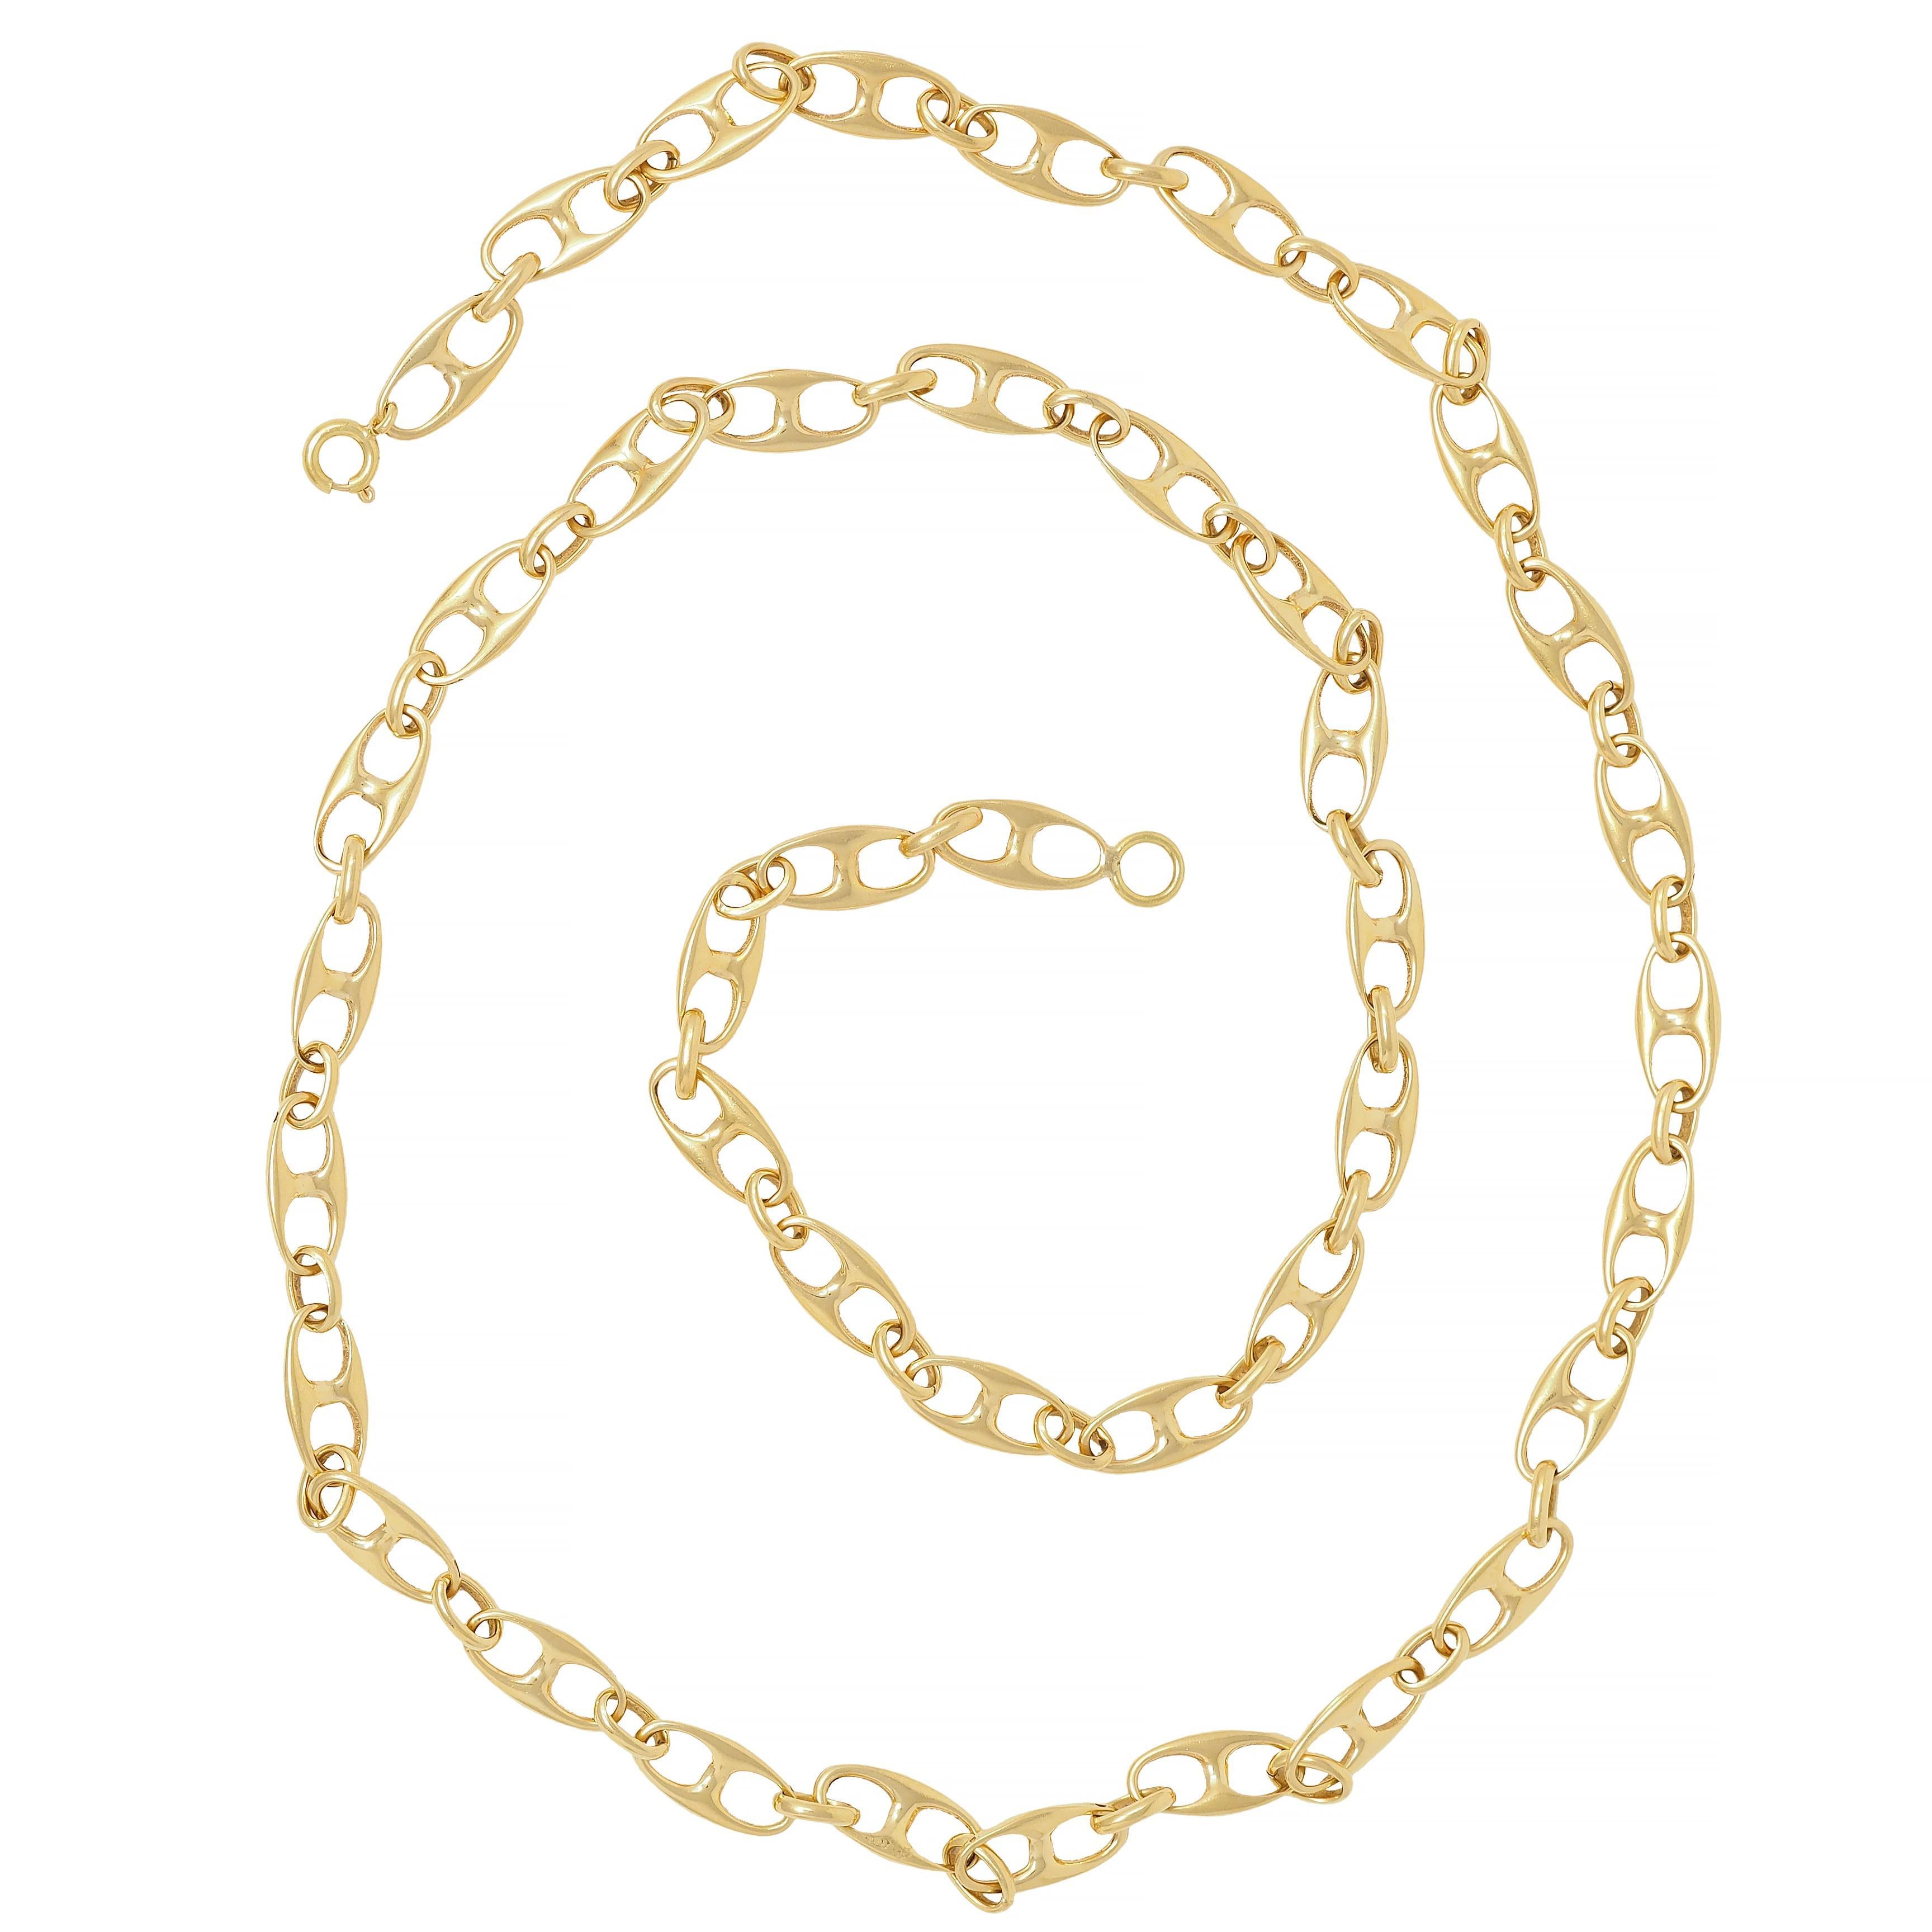 Comprised of puffy mariner links and oval links alternating in pattern
With high polish finish 
Completed by spring clasp closure
Stamped for 18 karat gold
Circa: 1960s
Width at widest: 1/4 inch 
Total length: 24 5/8 inches
Total weight: 25.4 grams